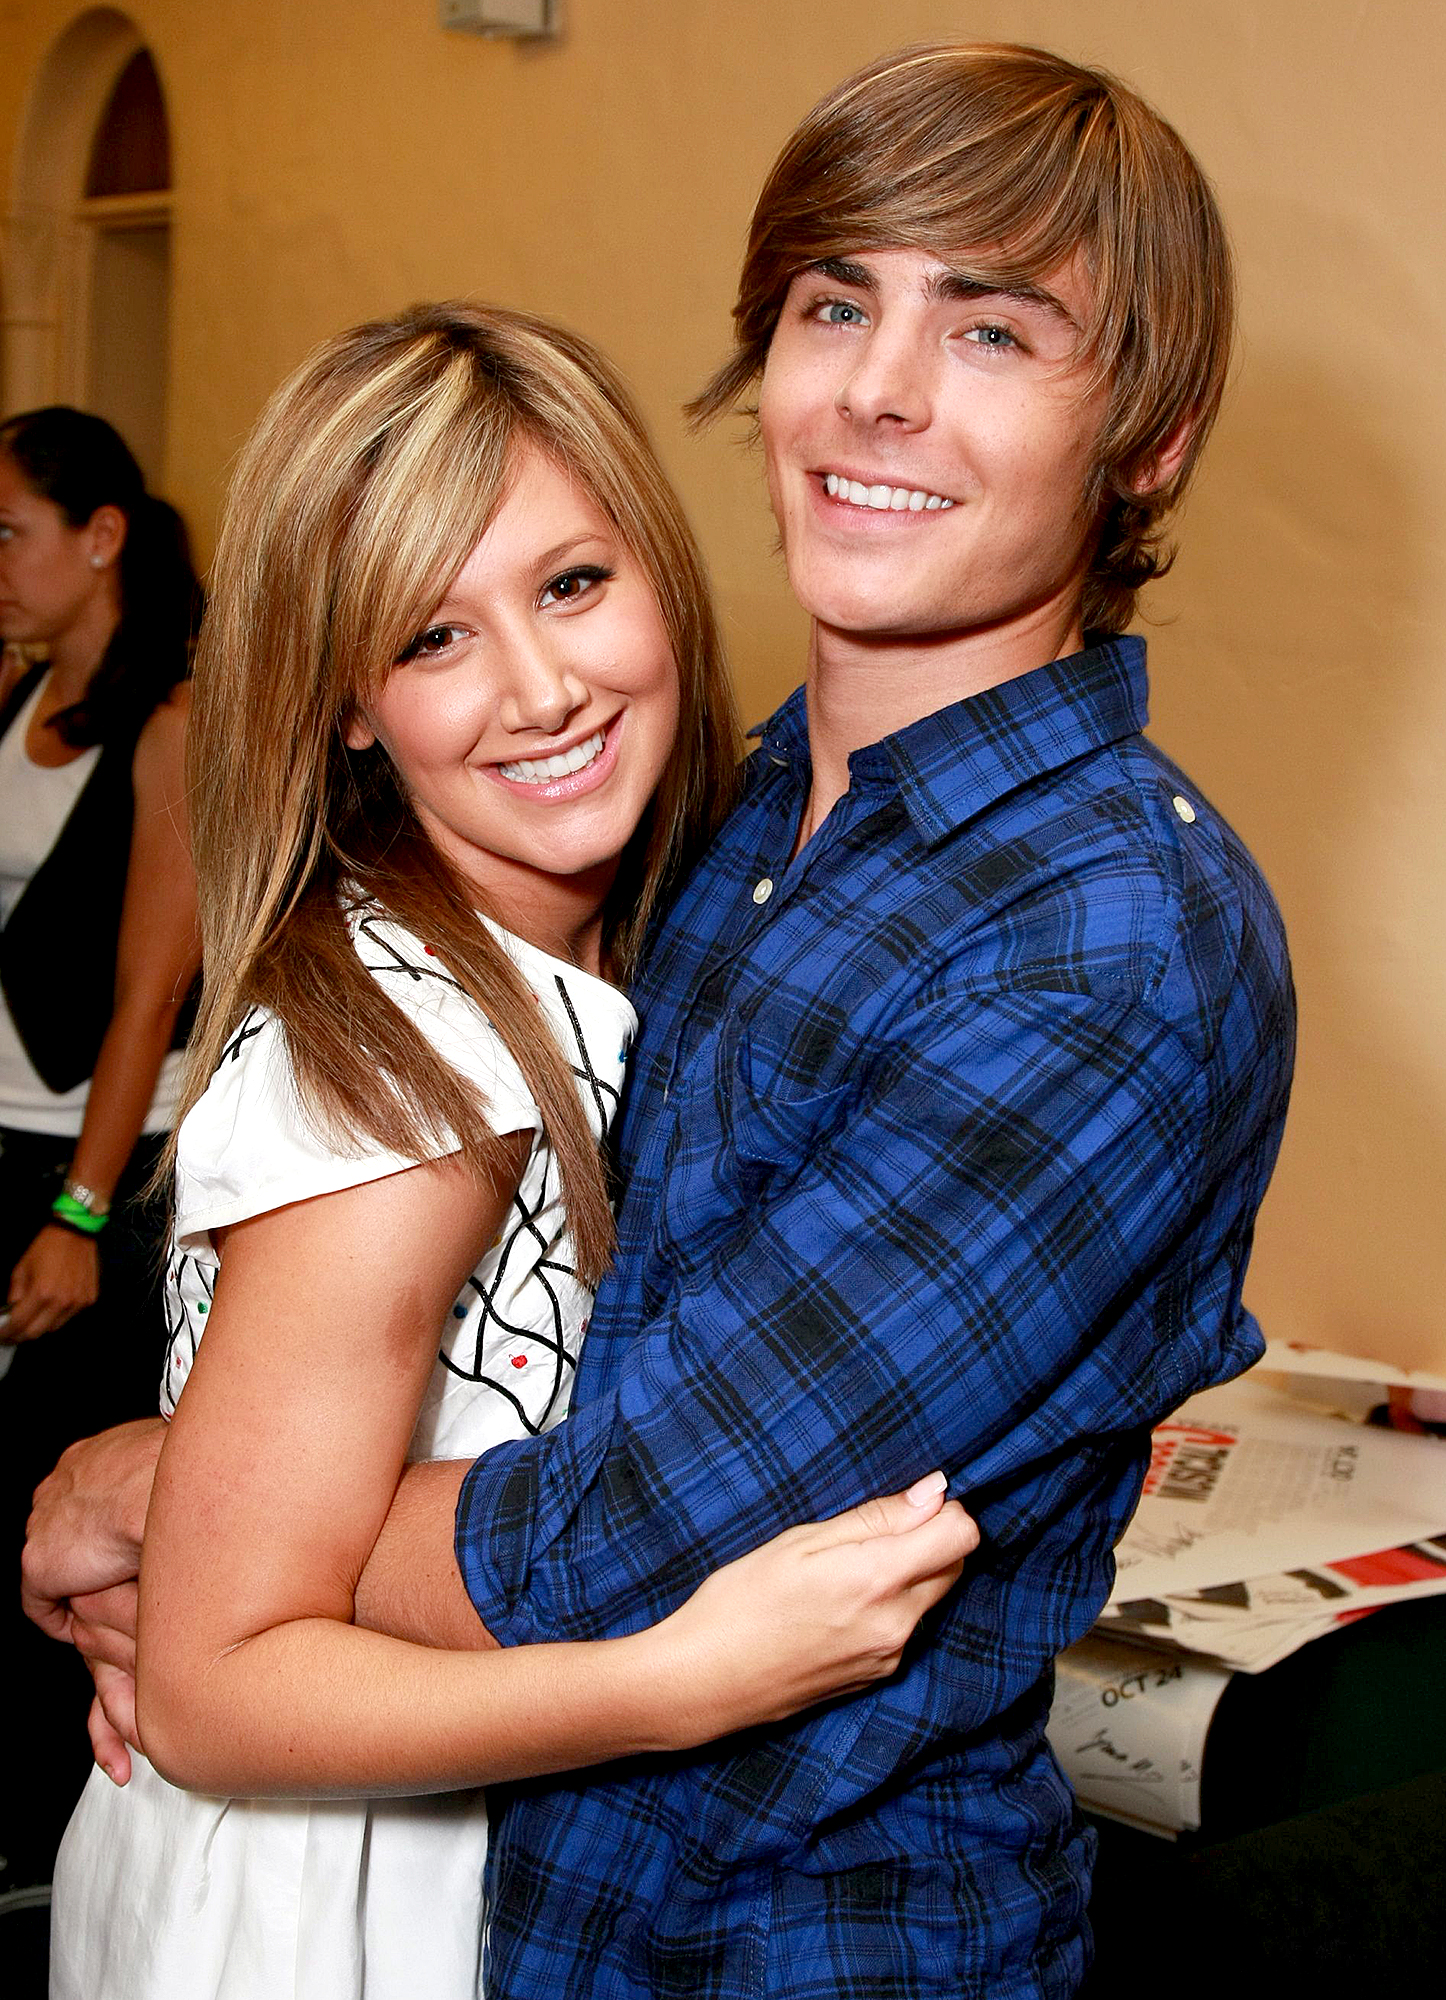 Ashley-Tisdale-and-Zac-Efron-High-School-Musical-3